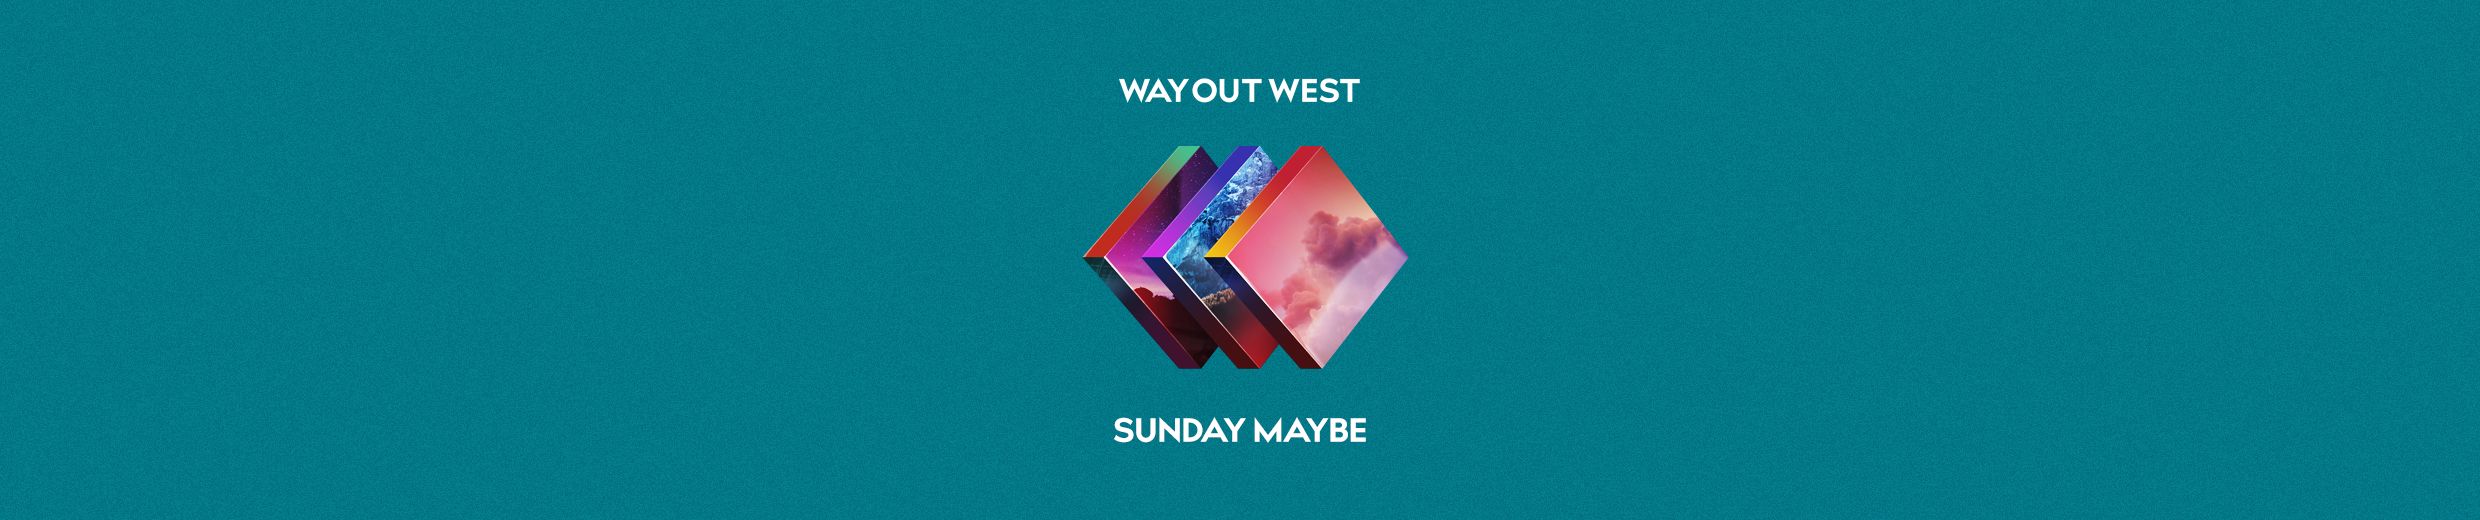 Way Out West's stream